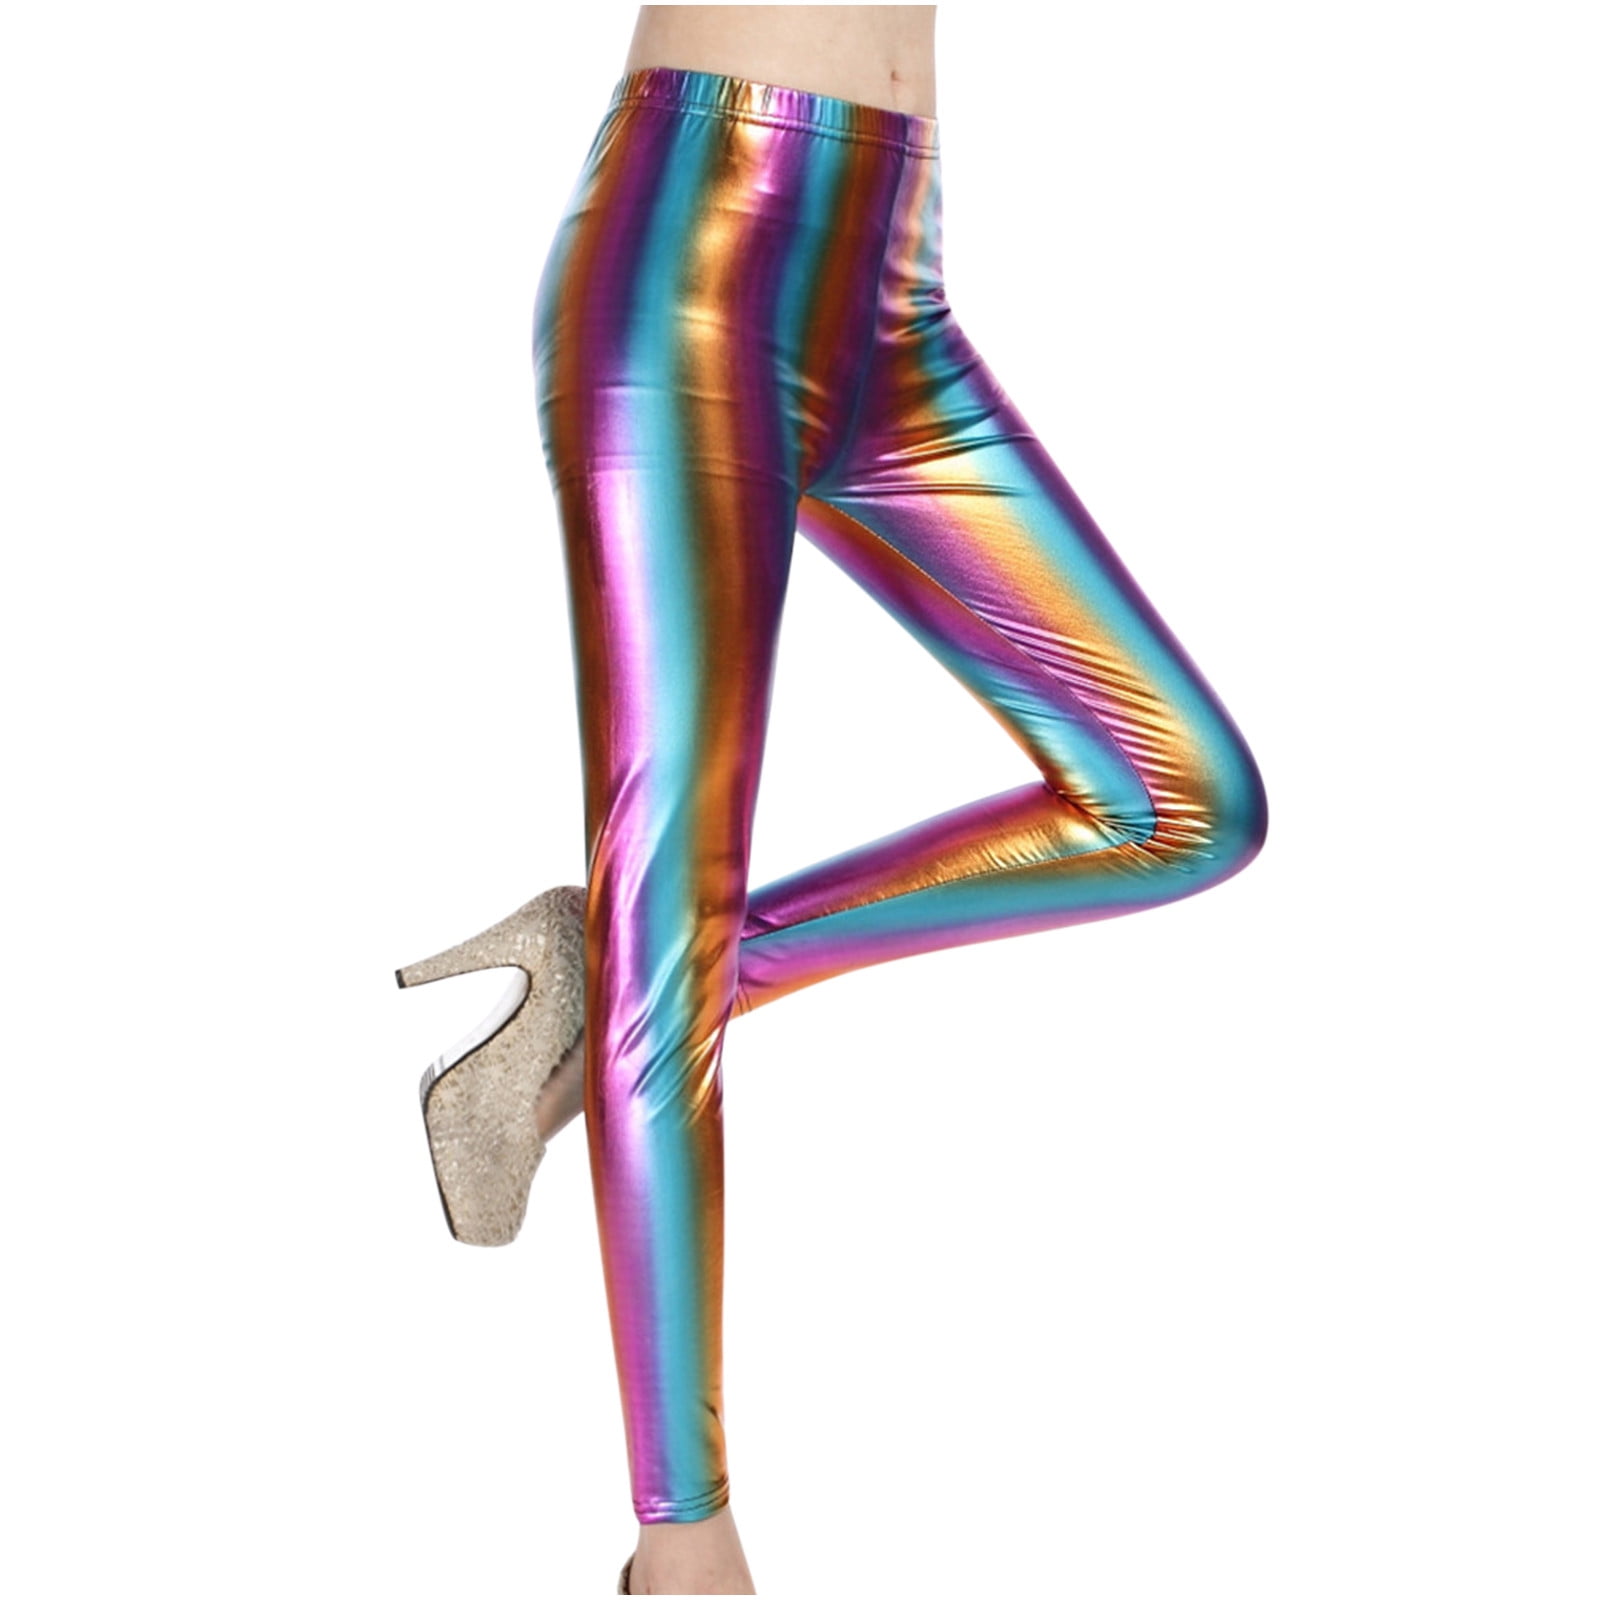 YYDGH Women's Shiny Metallic Leggings Sexy High Gloss Skinny Pants Faux  Leather Stretch Shaping Tights Trousers Multi-color XL 